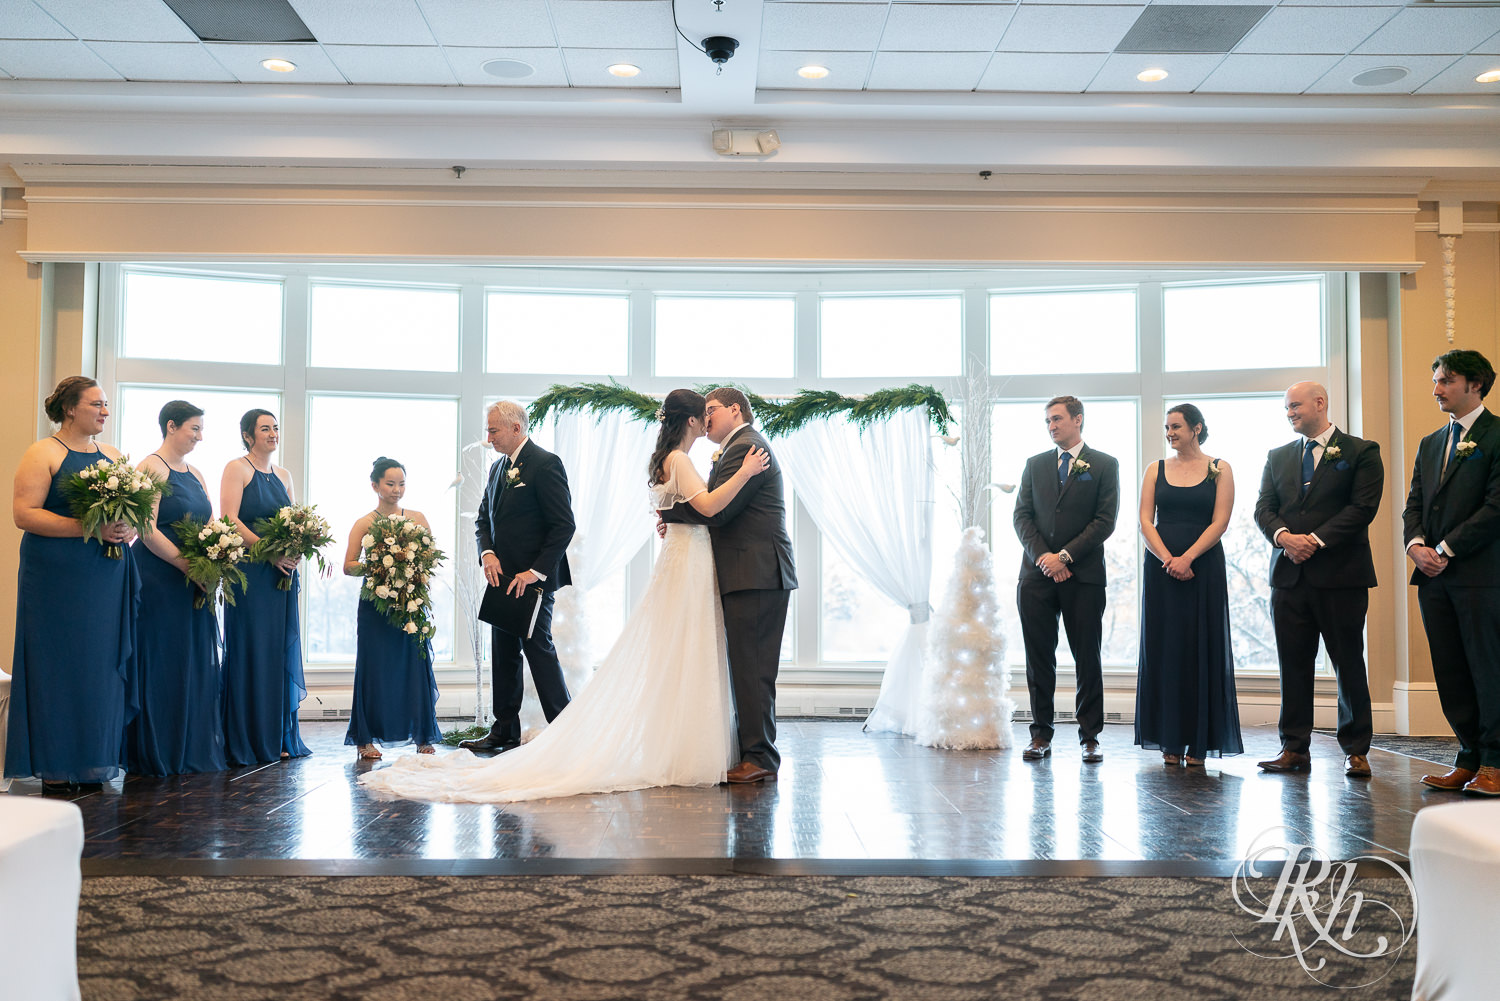 Bride and groom share first kiss at wedding ceremony at Minneapolis Golf Club in Saint Louis Park, Minnesota.